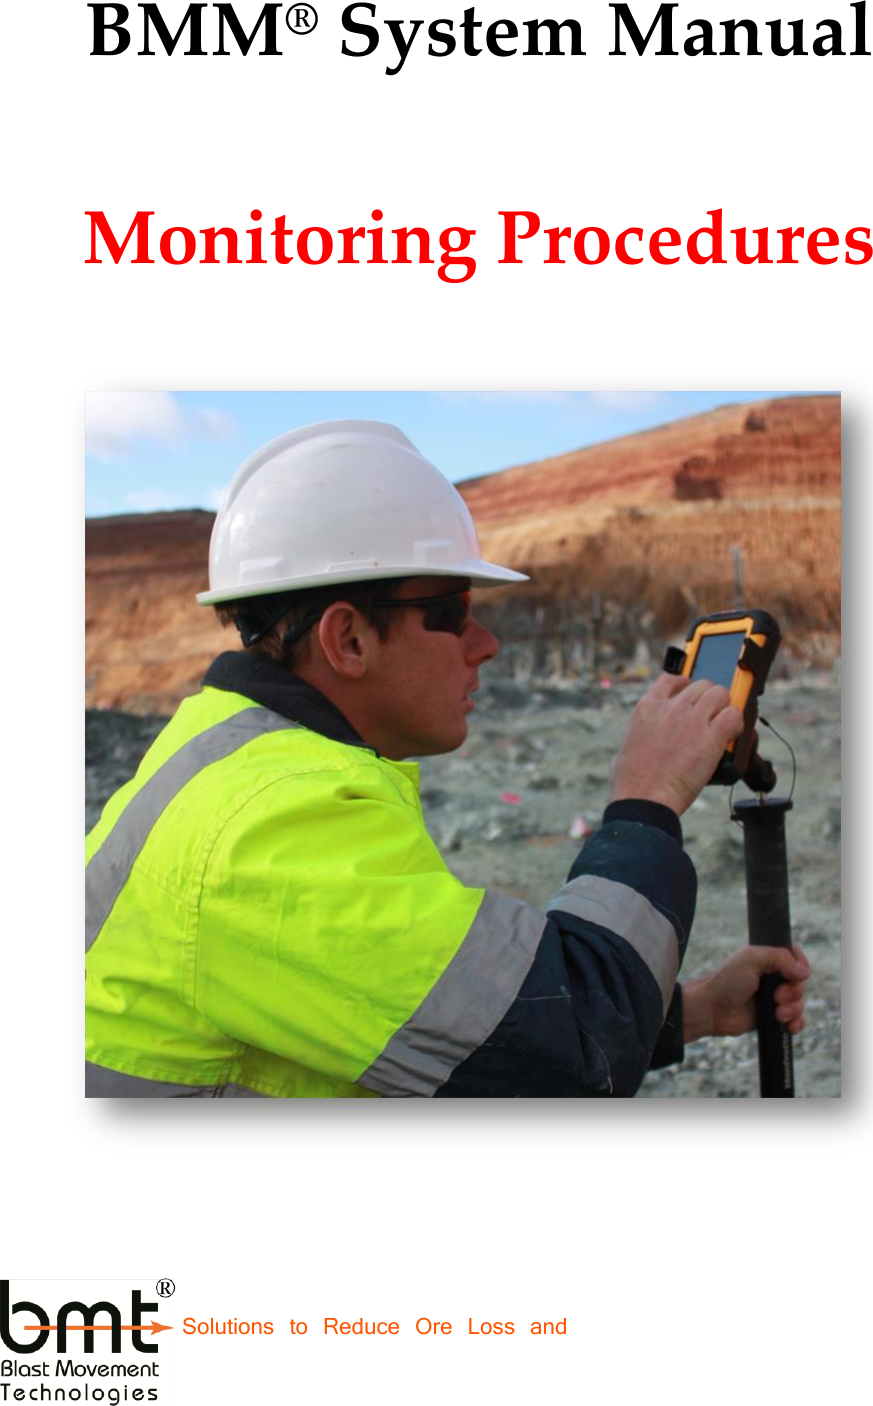     BMM® System Manual    Monitoring Procedures      Solutions to Reduce Ore Loss and Dilution 